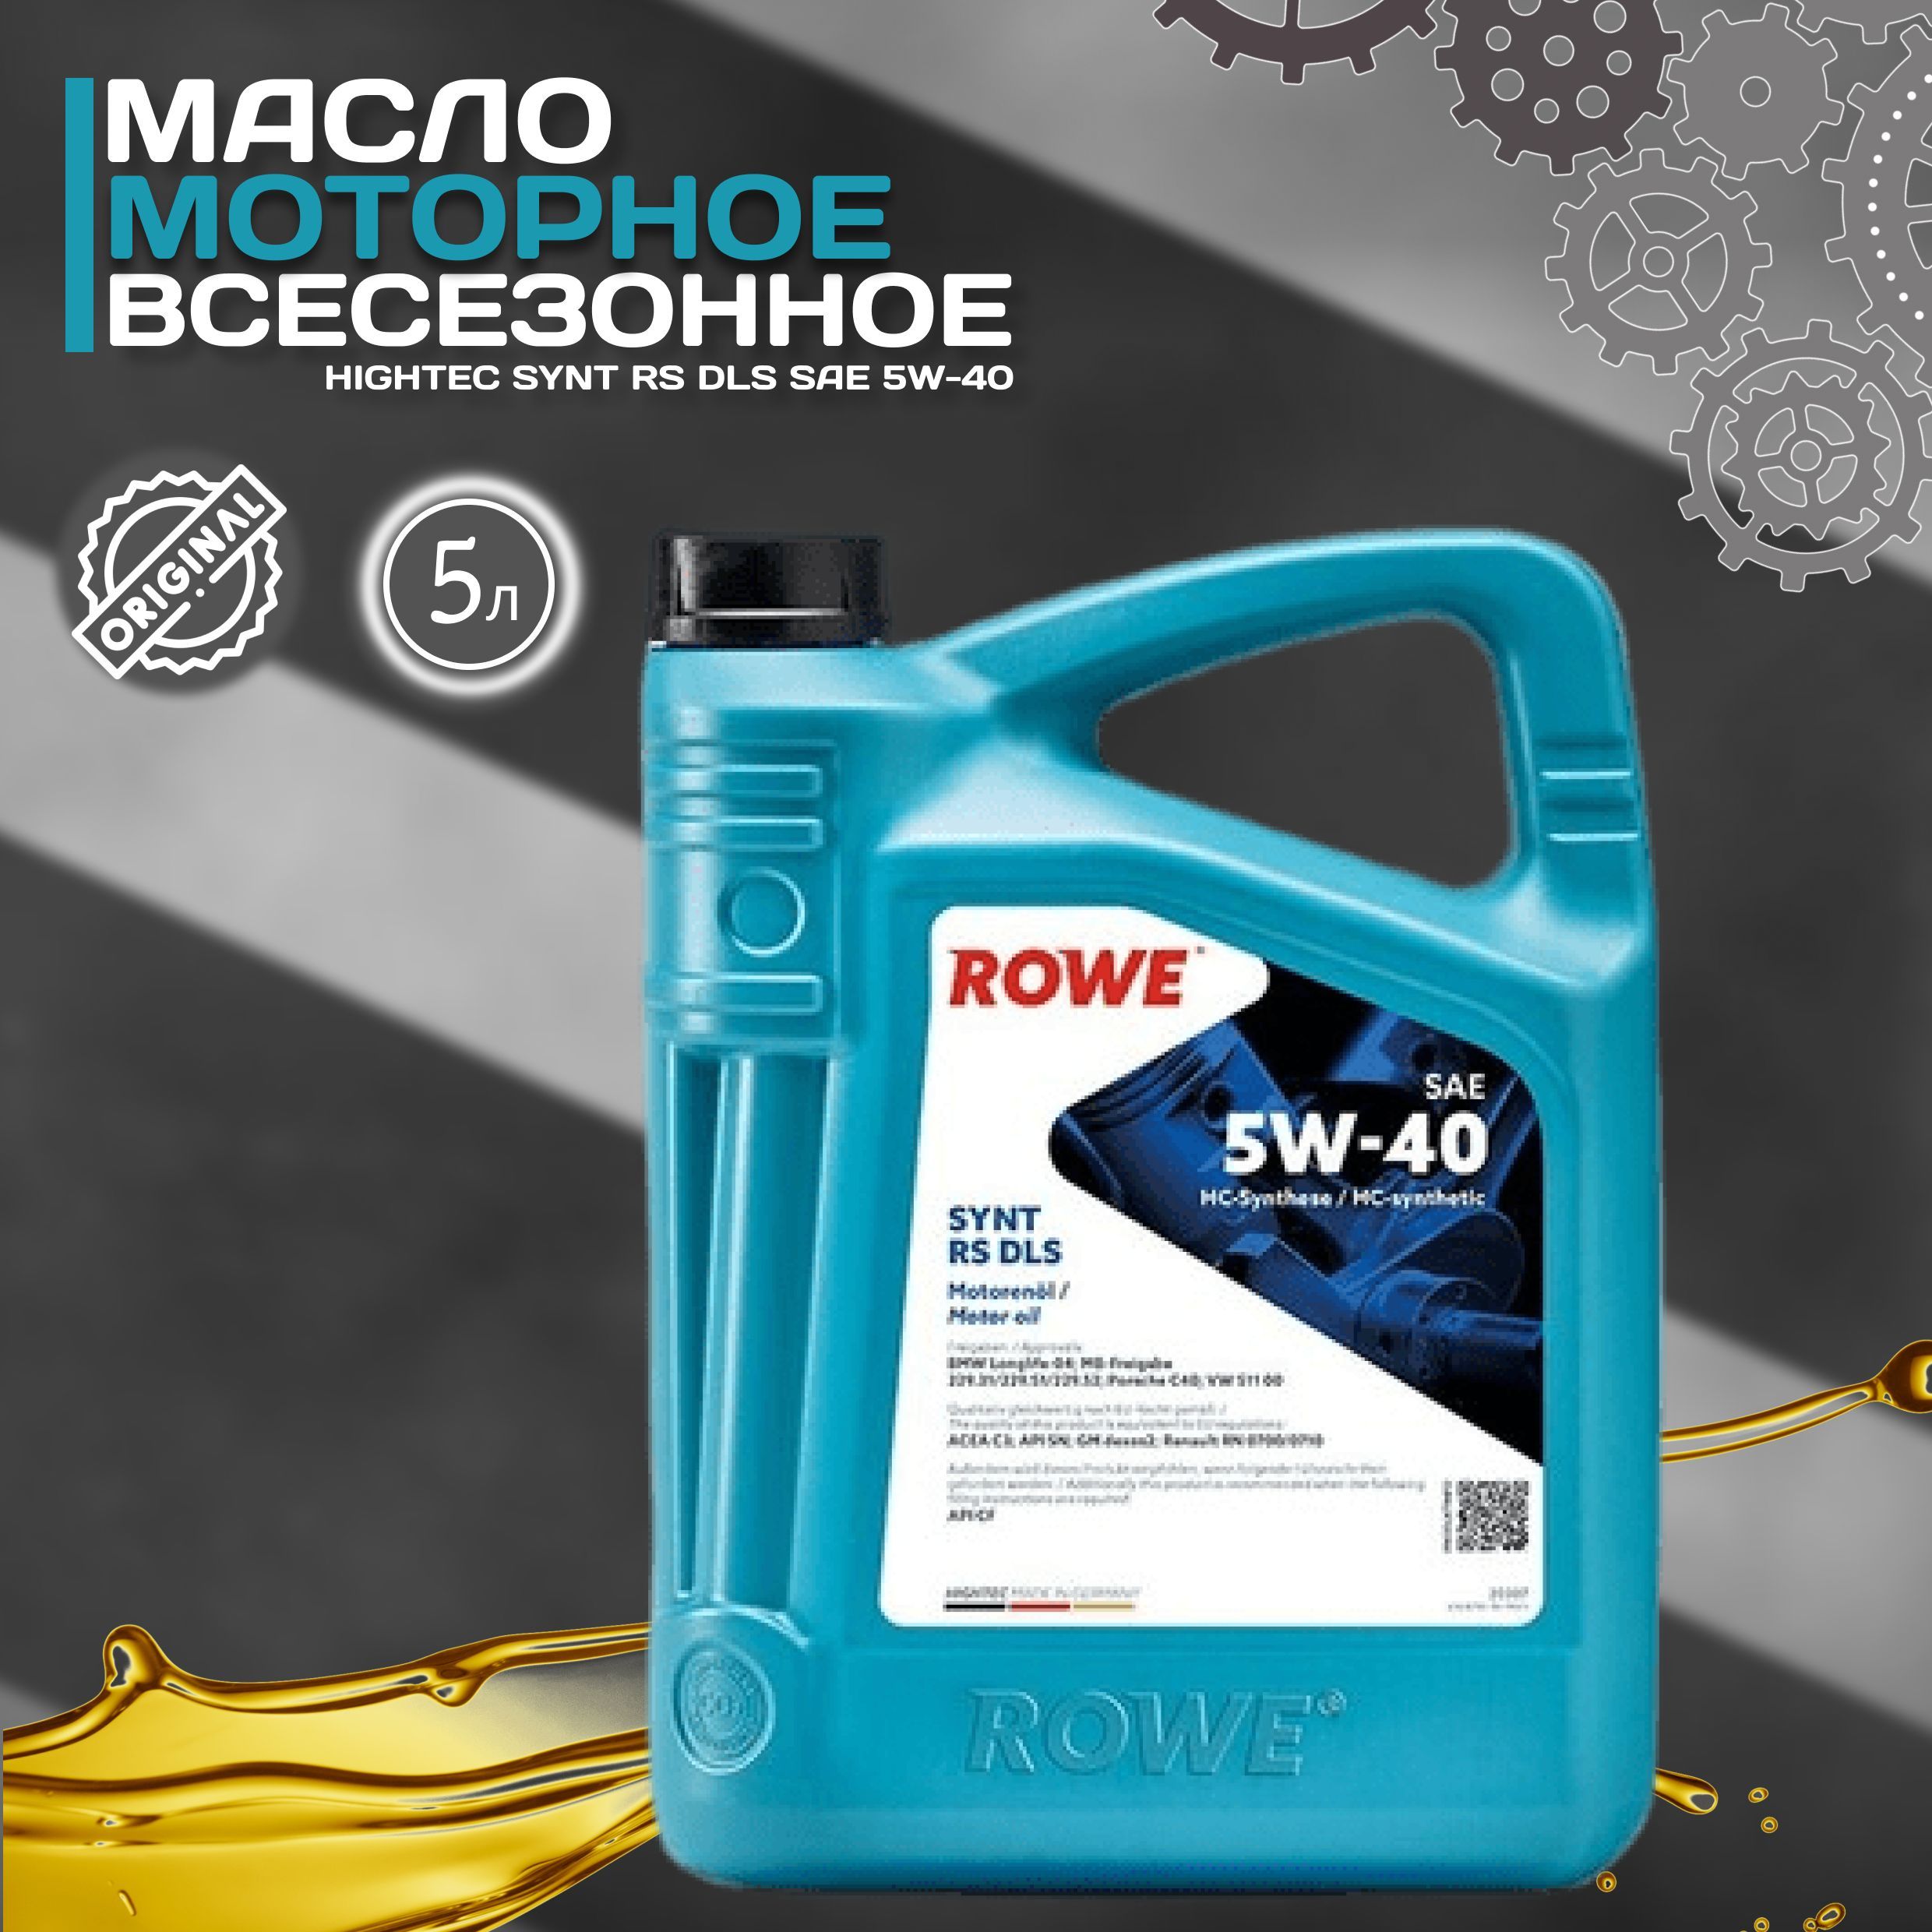 Rowe 5w40. Rowe Hightec Synt RS DLS. Rowe 5w40 Hightec Synt RC HC-D. Rowe 5w40 504 507. Масло rowe rs